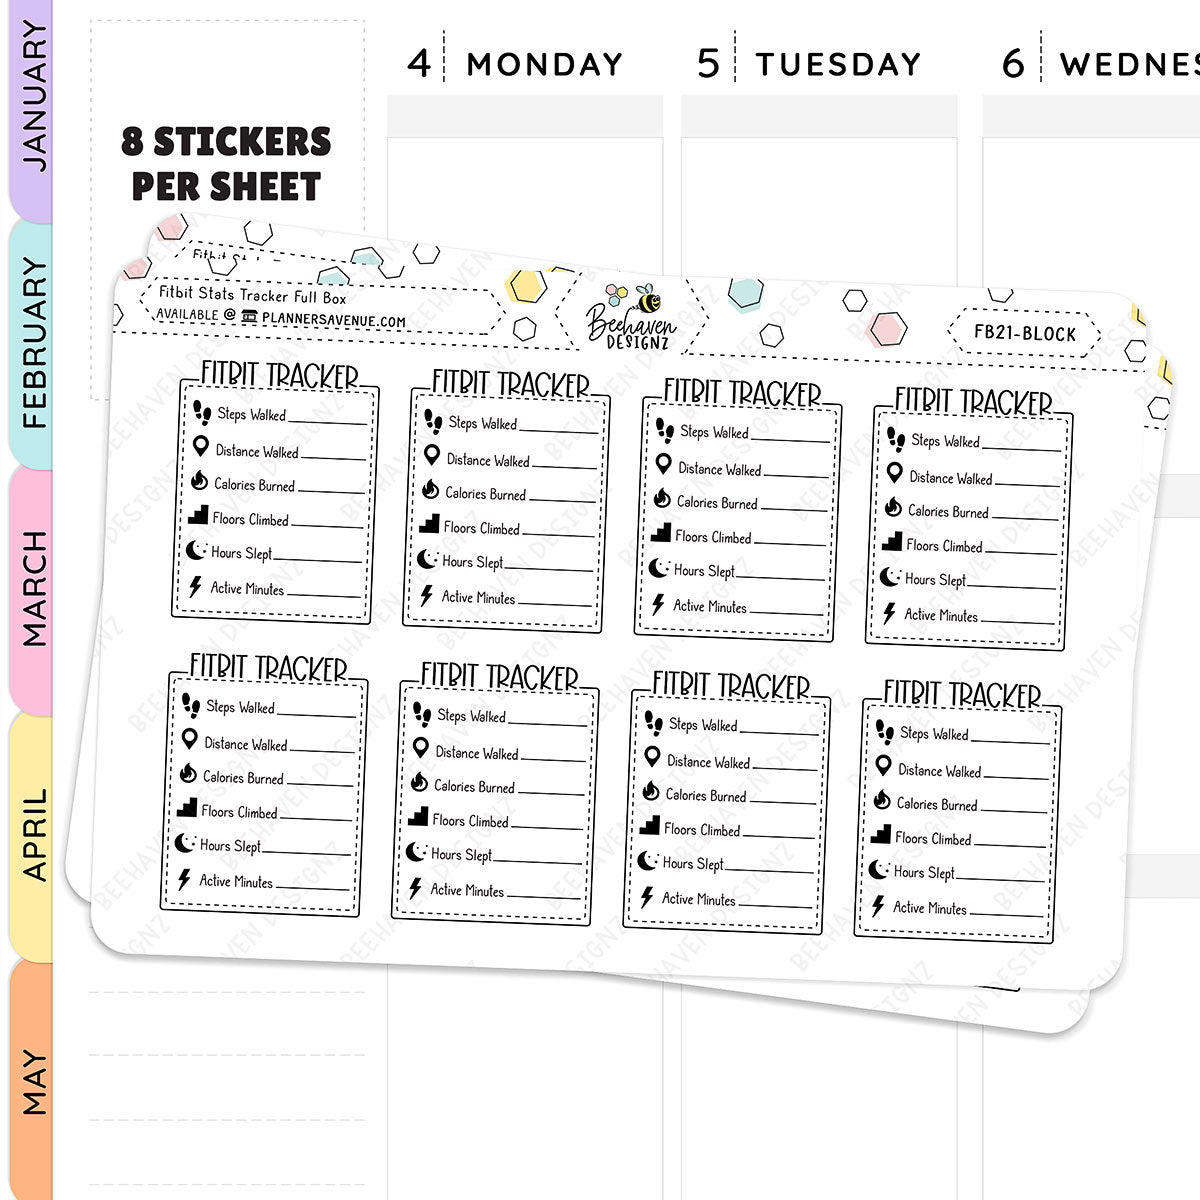 Weekly Fitbit Tracker Planner Stickers